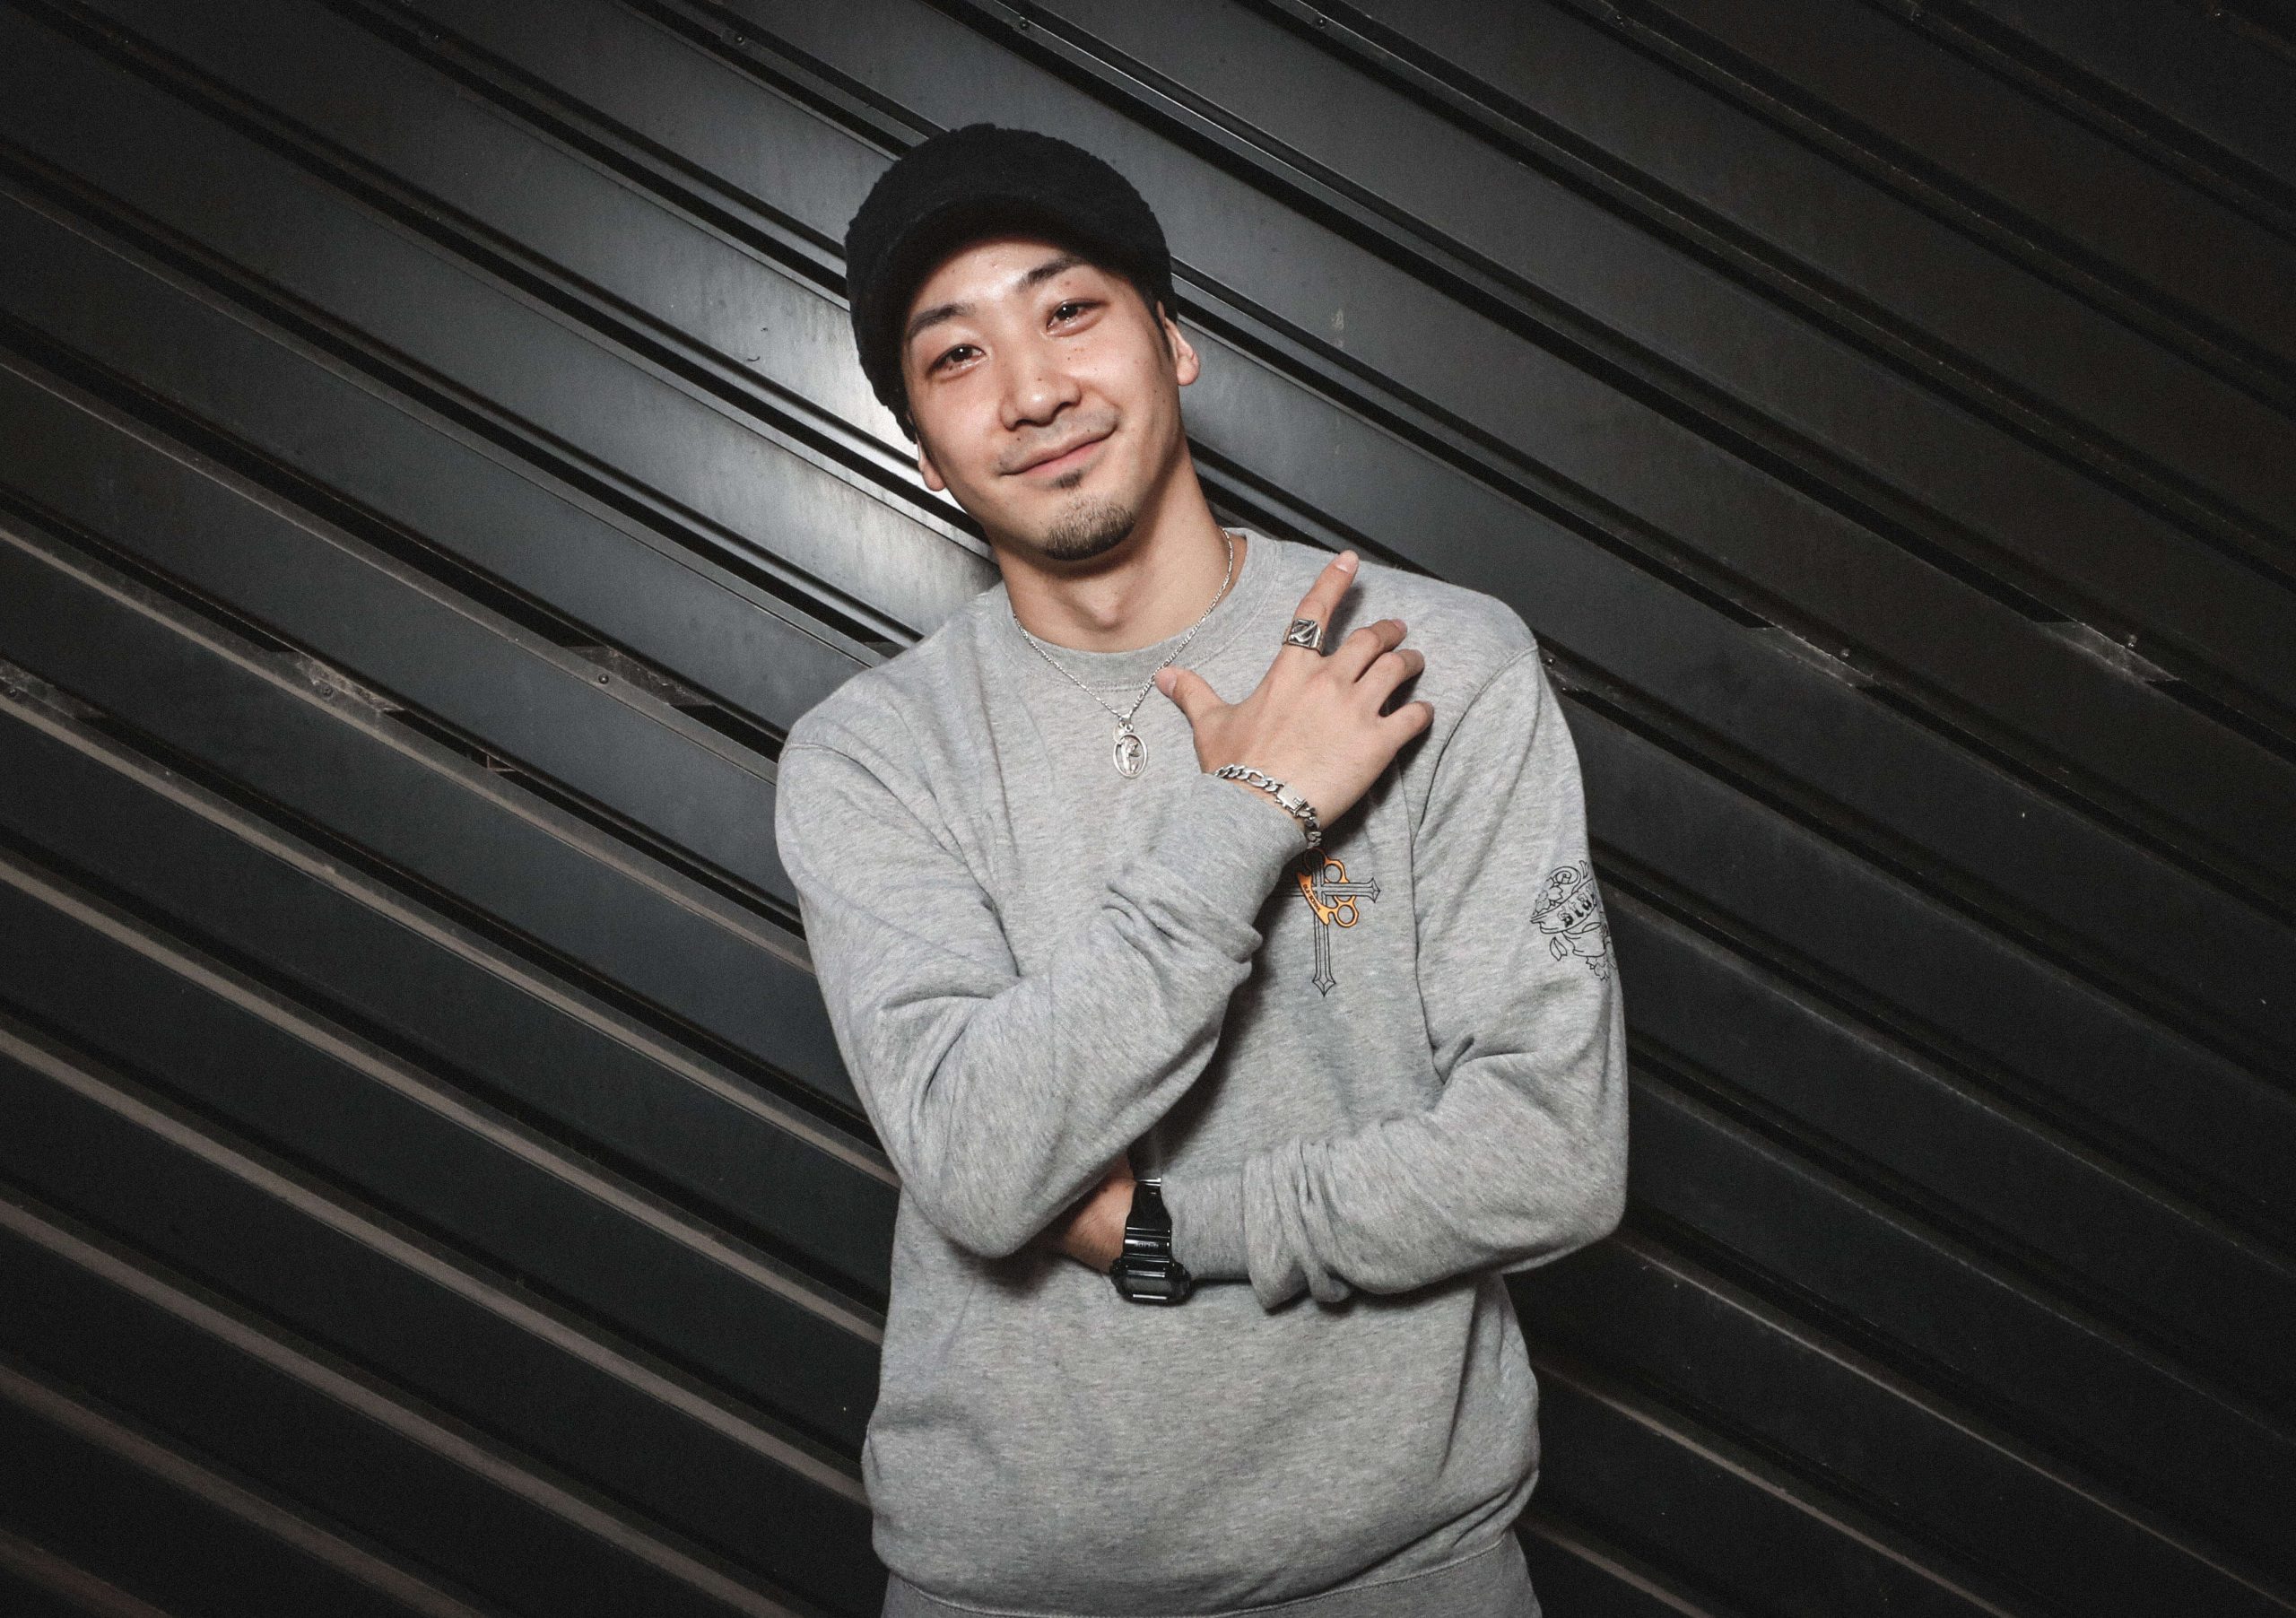 He is a worldwide renown dancer and teacher from Japan, representing Popping.